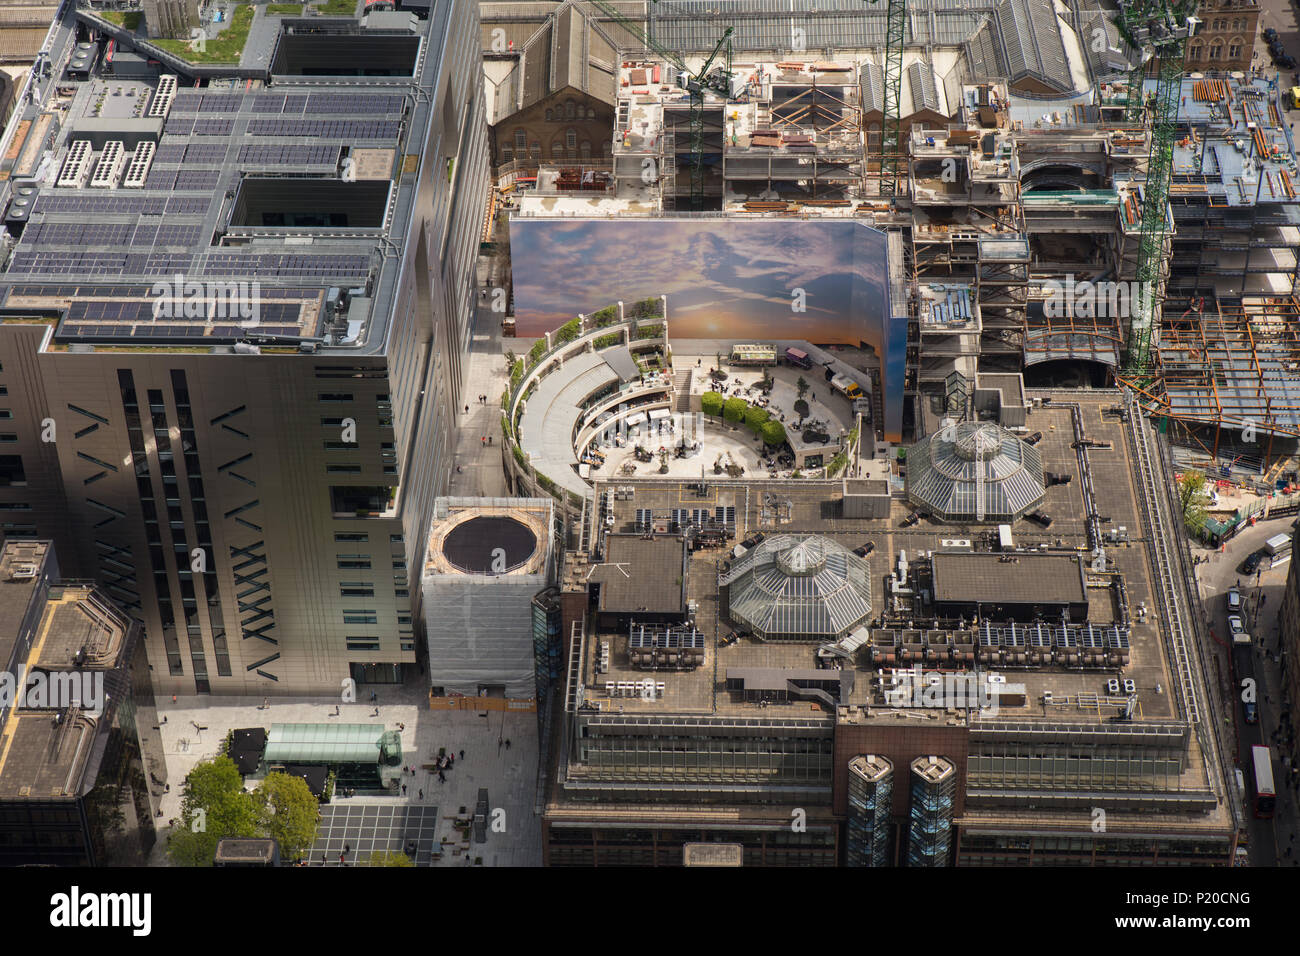 An aerial view showing Broadgate Circus in Central London and local building development Stock Photo